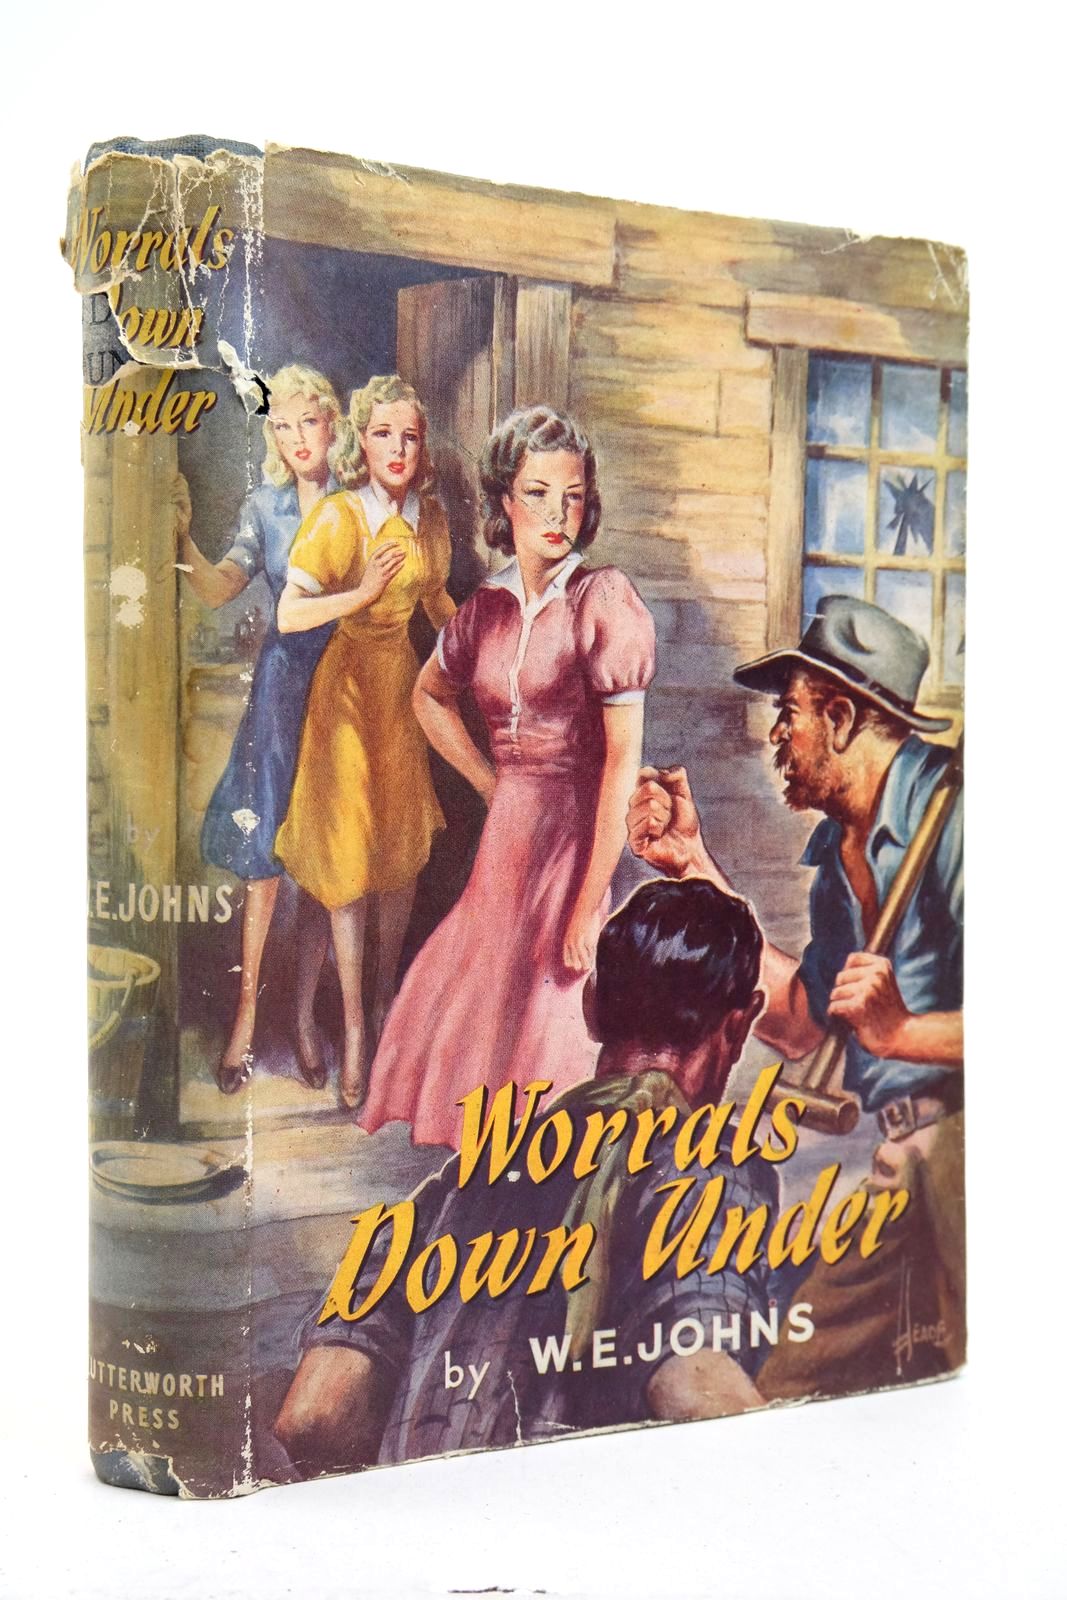 Photo of WORRALS DOWN UNDER written by Johns, W.E. published by Lutterworth Press (STOCK CODE: 2139741)  for sale by Stella & Rose's Books